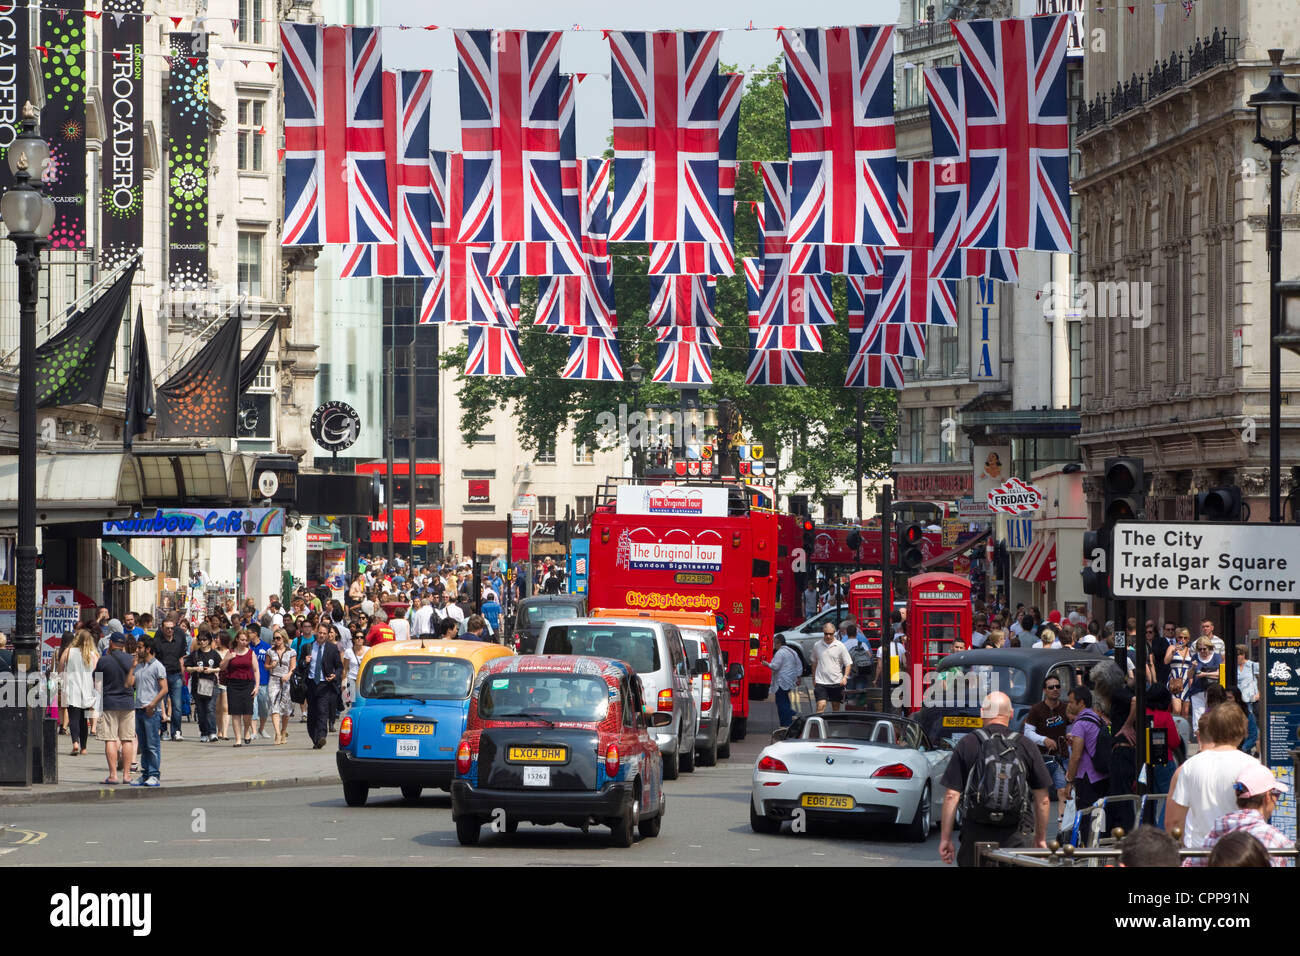 Union Jack flags on display in Central London during the Queen's Diamond Jubilee celebrations, London, United Kingdom Stock Photo